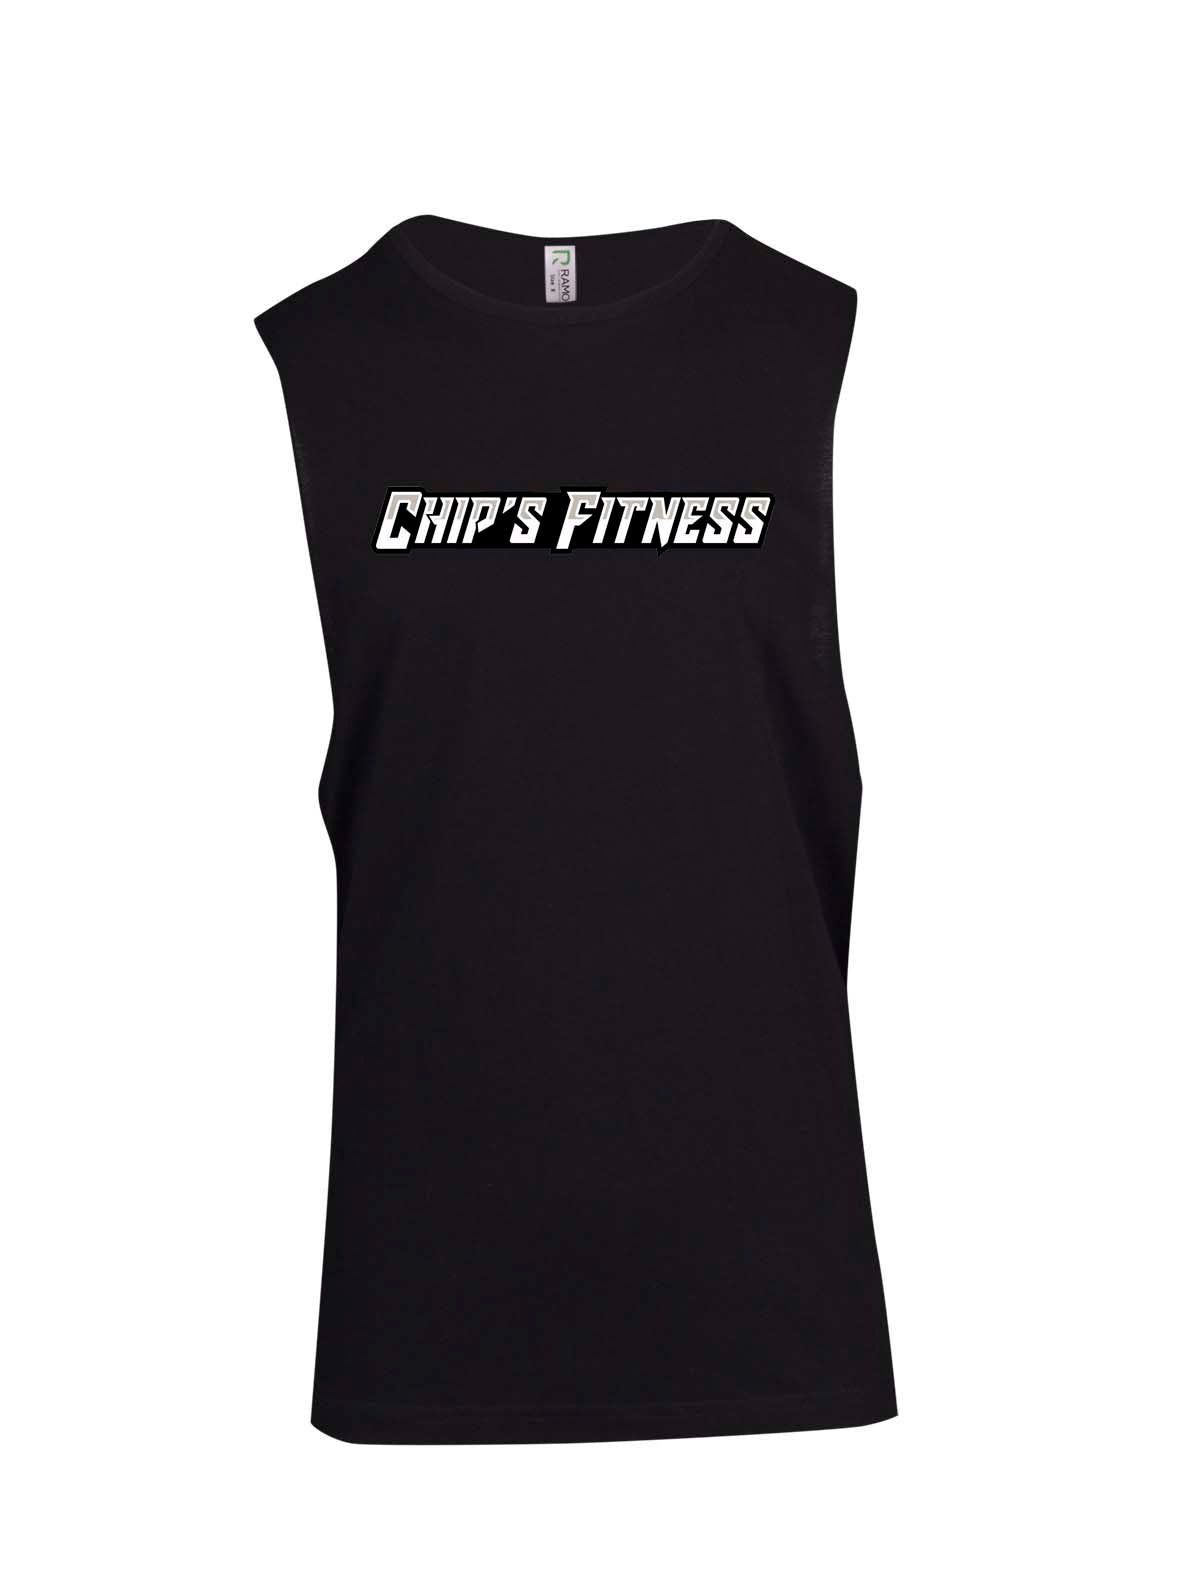 Chip's Fitness Double sided Logo Muscle T - Ladies